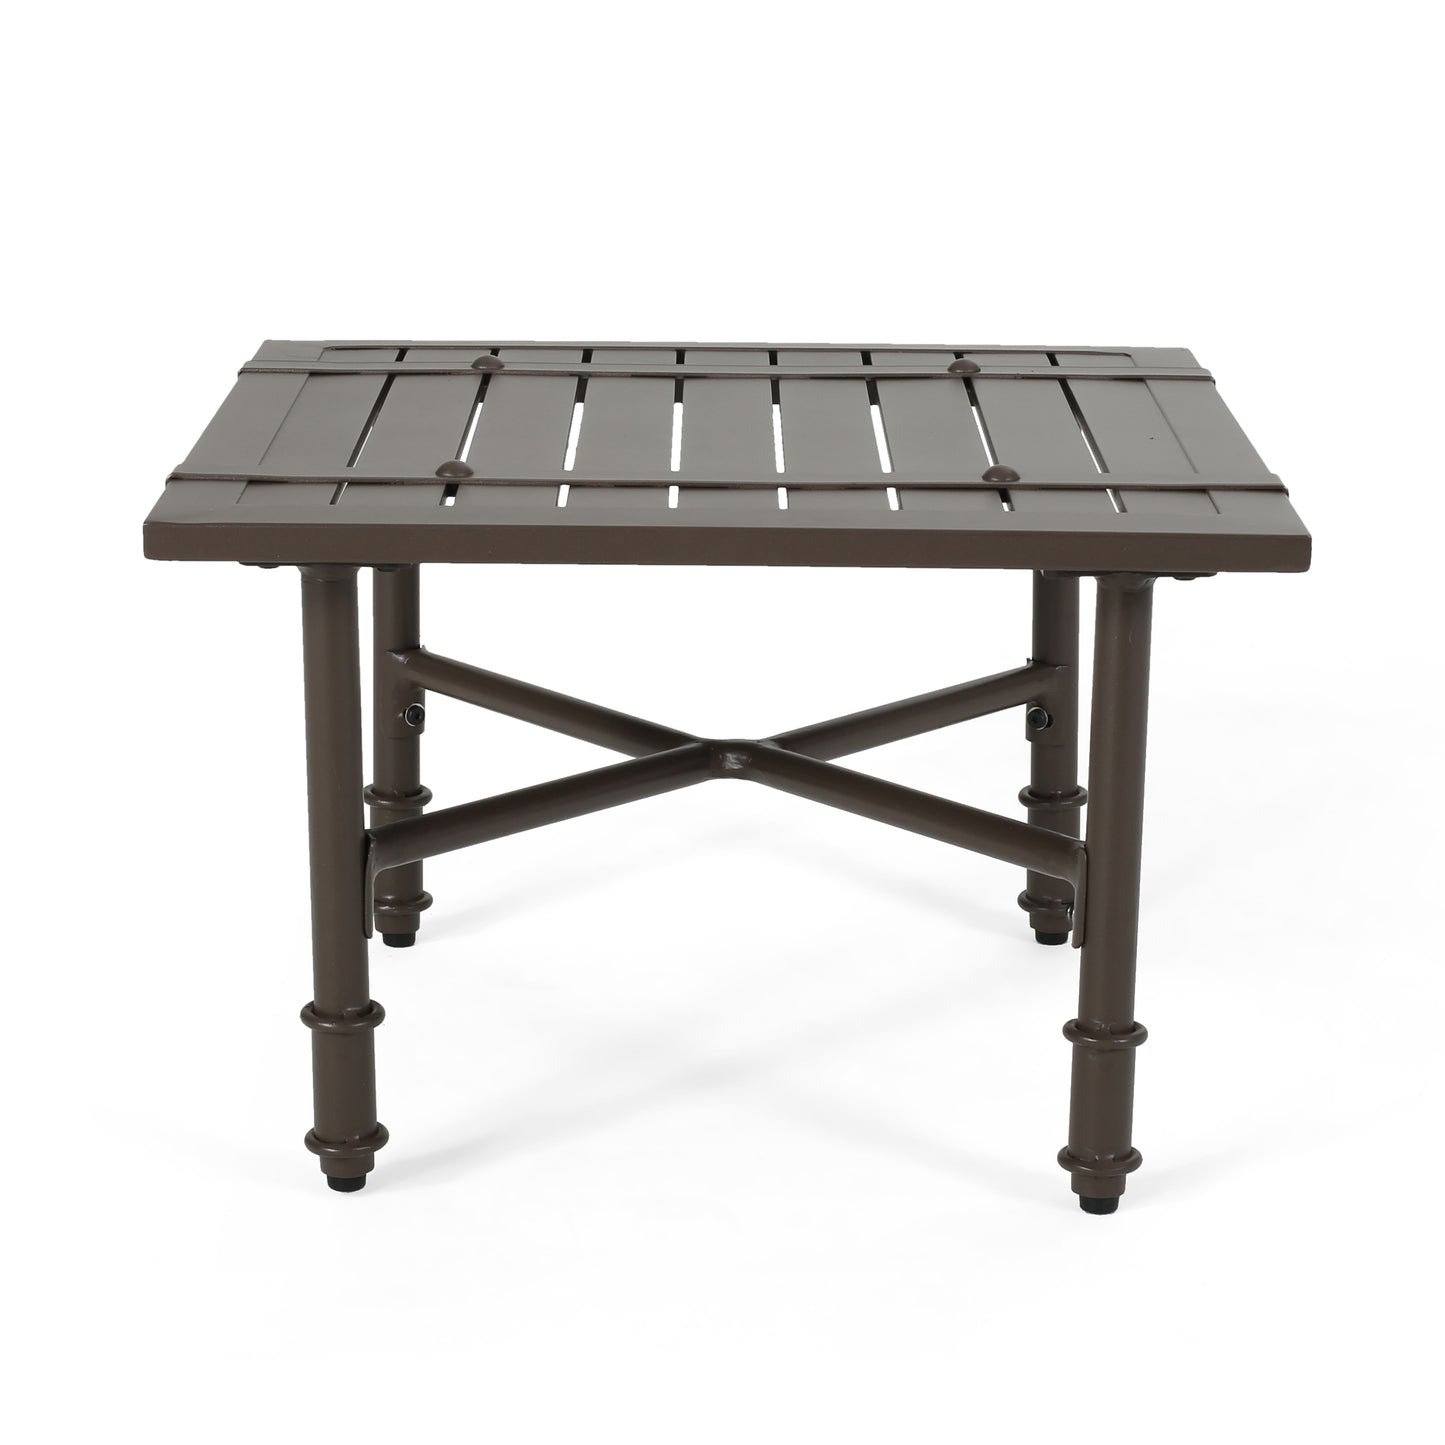 Francis Outdoor Aluminum Side Table